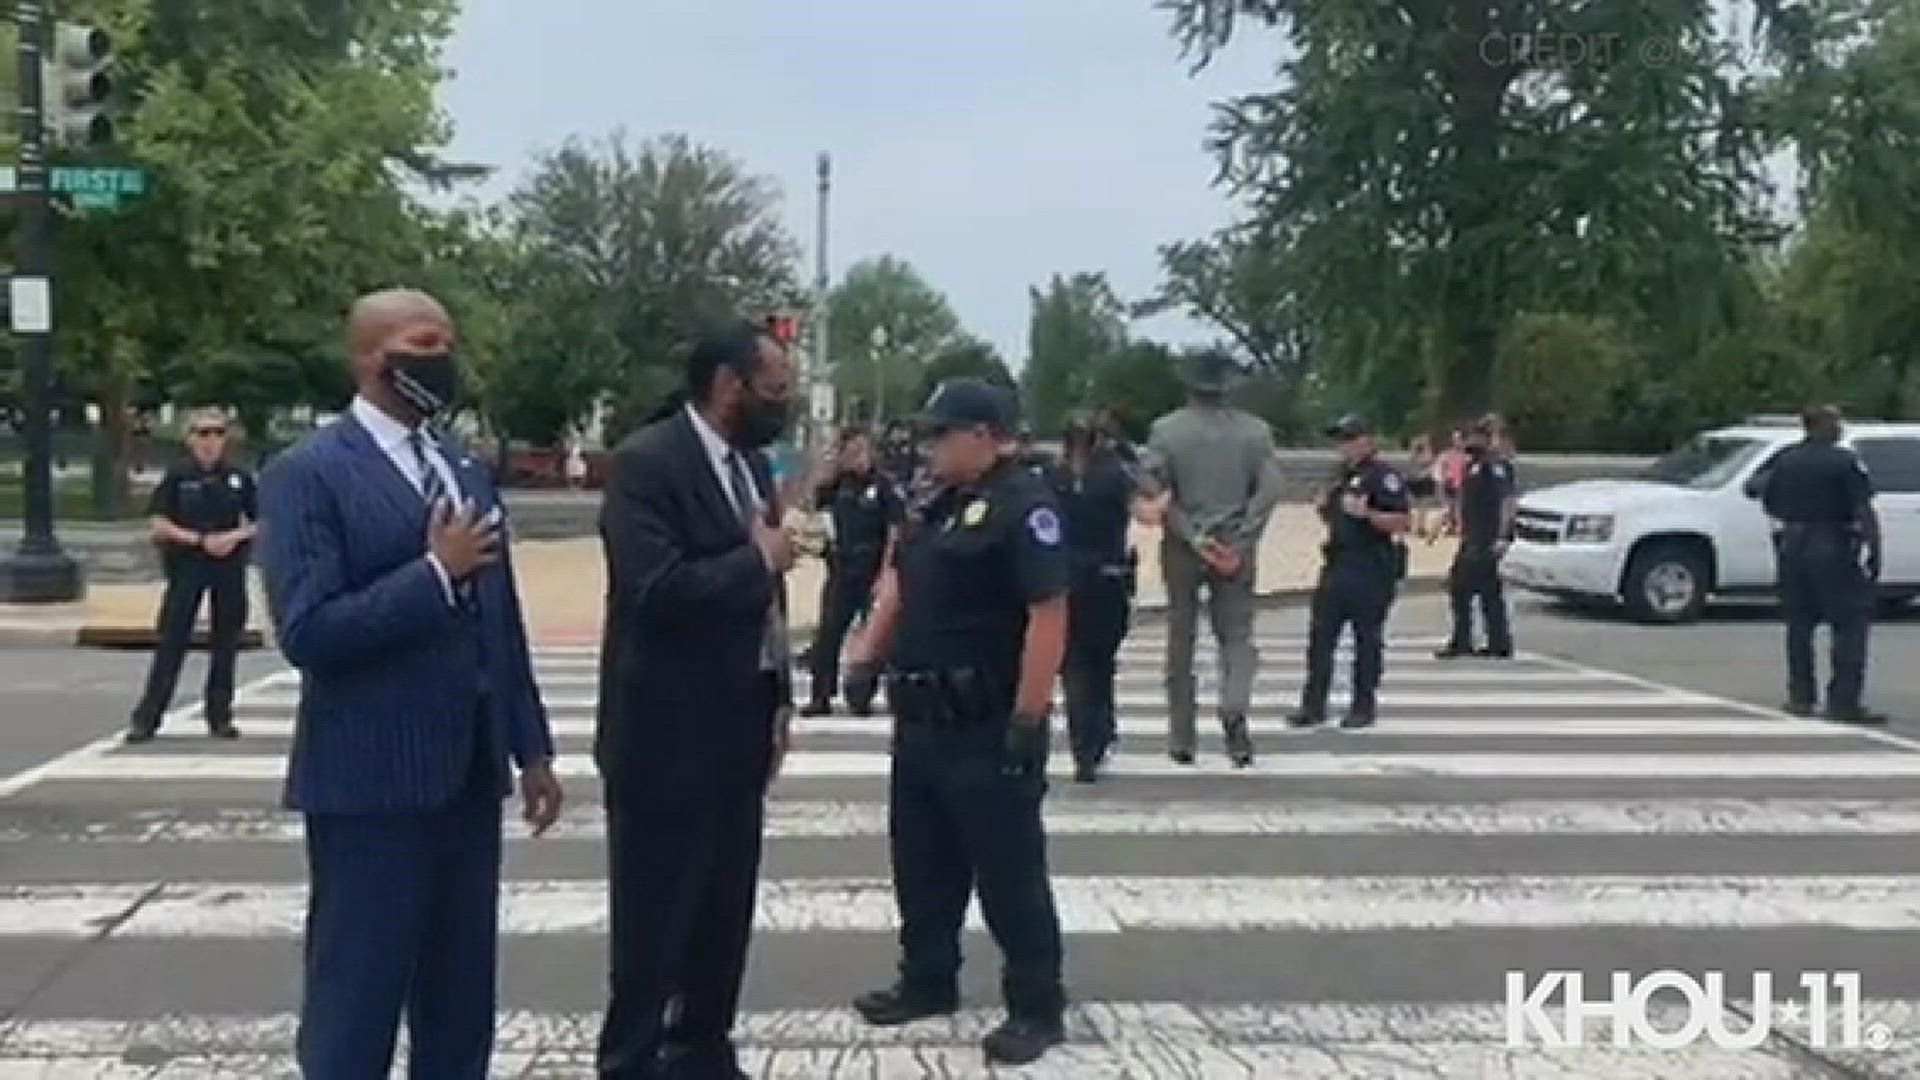 Rep. Al Green posted this video to Twitter showing his arrest in Washington, D.C. on Tuesday, Aug. 3, 2021. He and others were protesting against voting legislation.